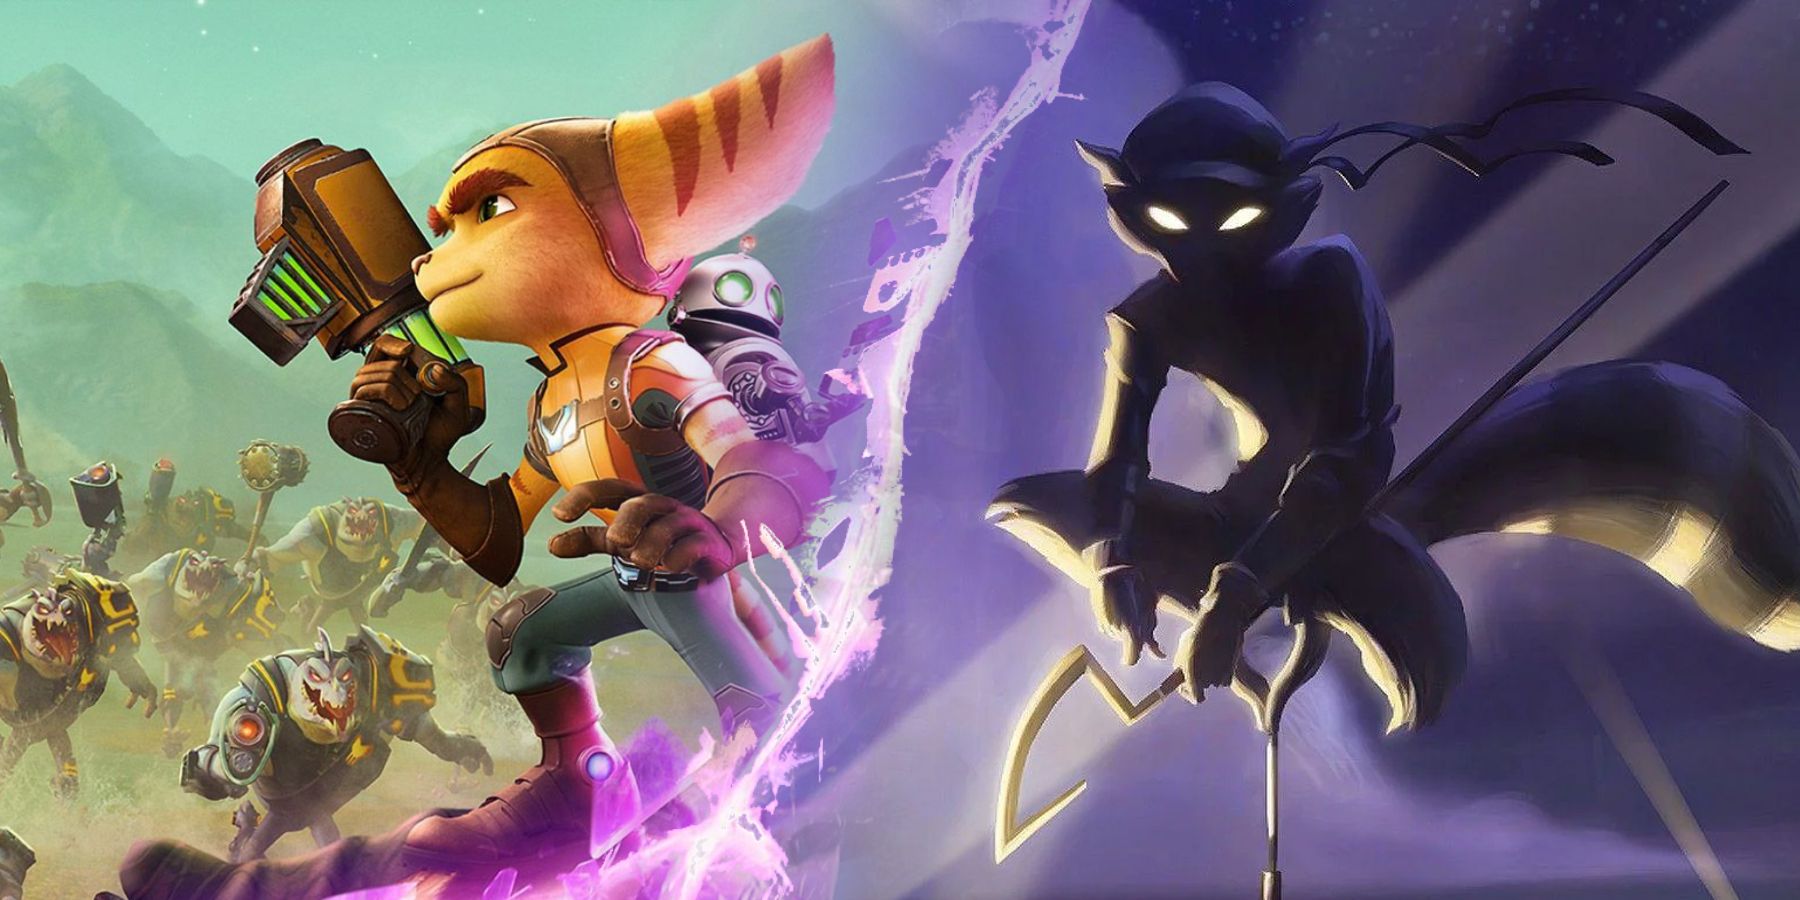 Sucker Punch Insomniac Ratchet and Clank Sly Cooper